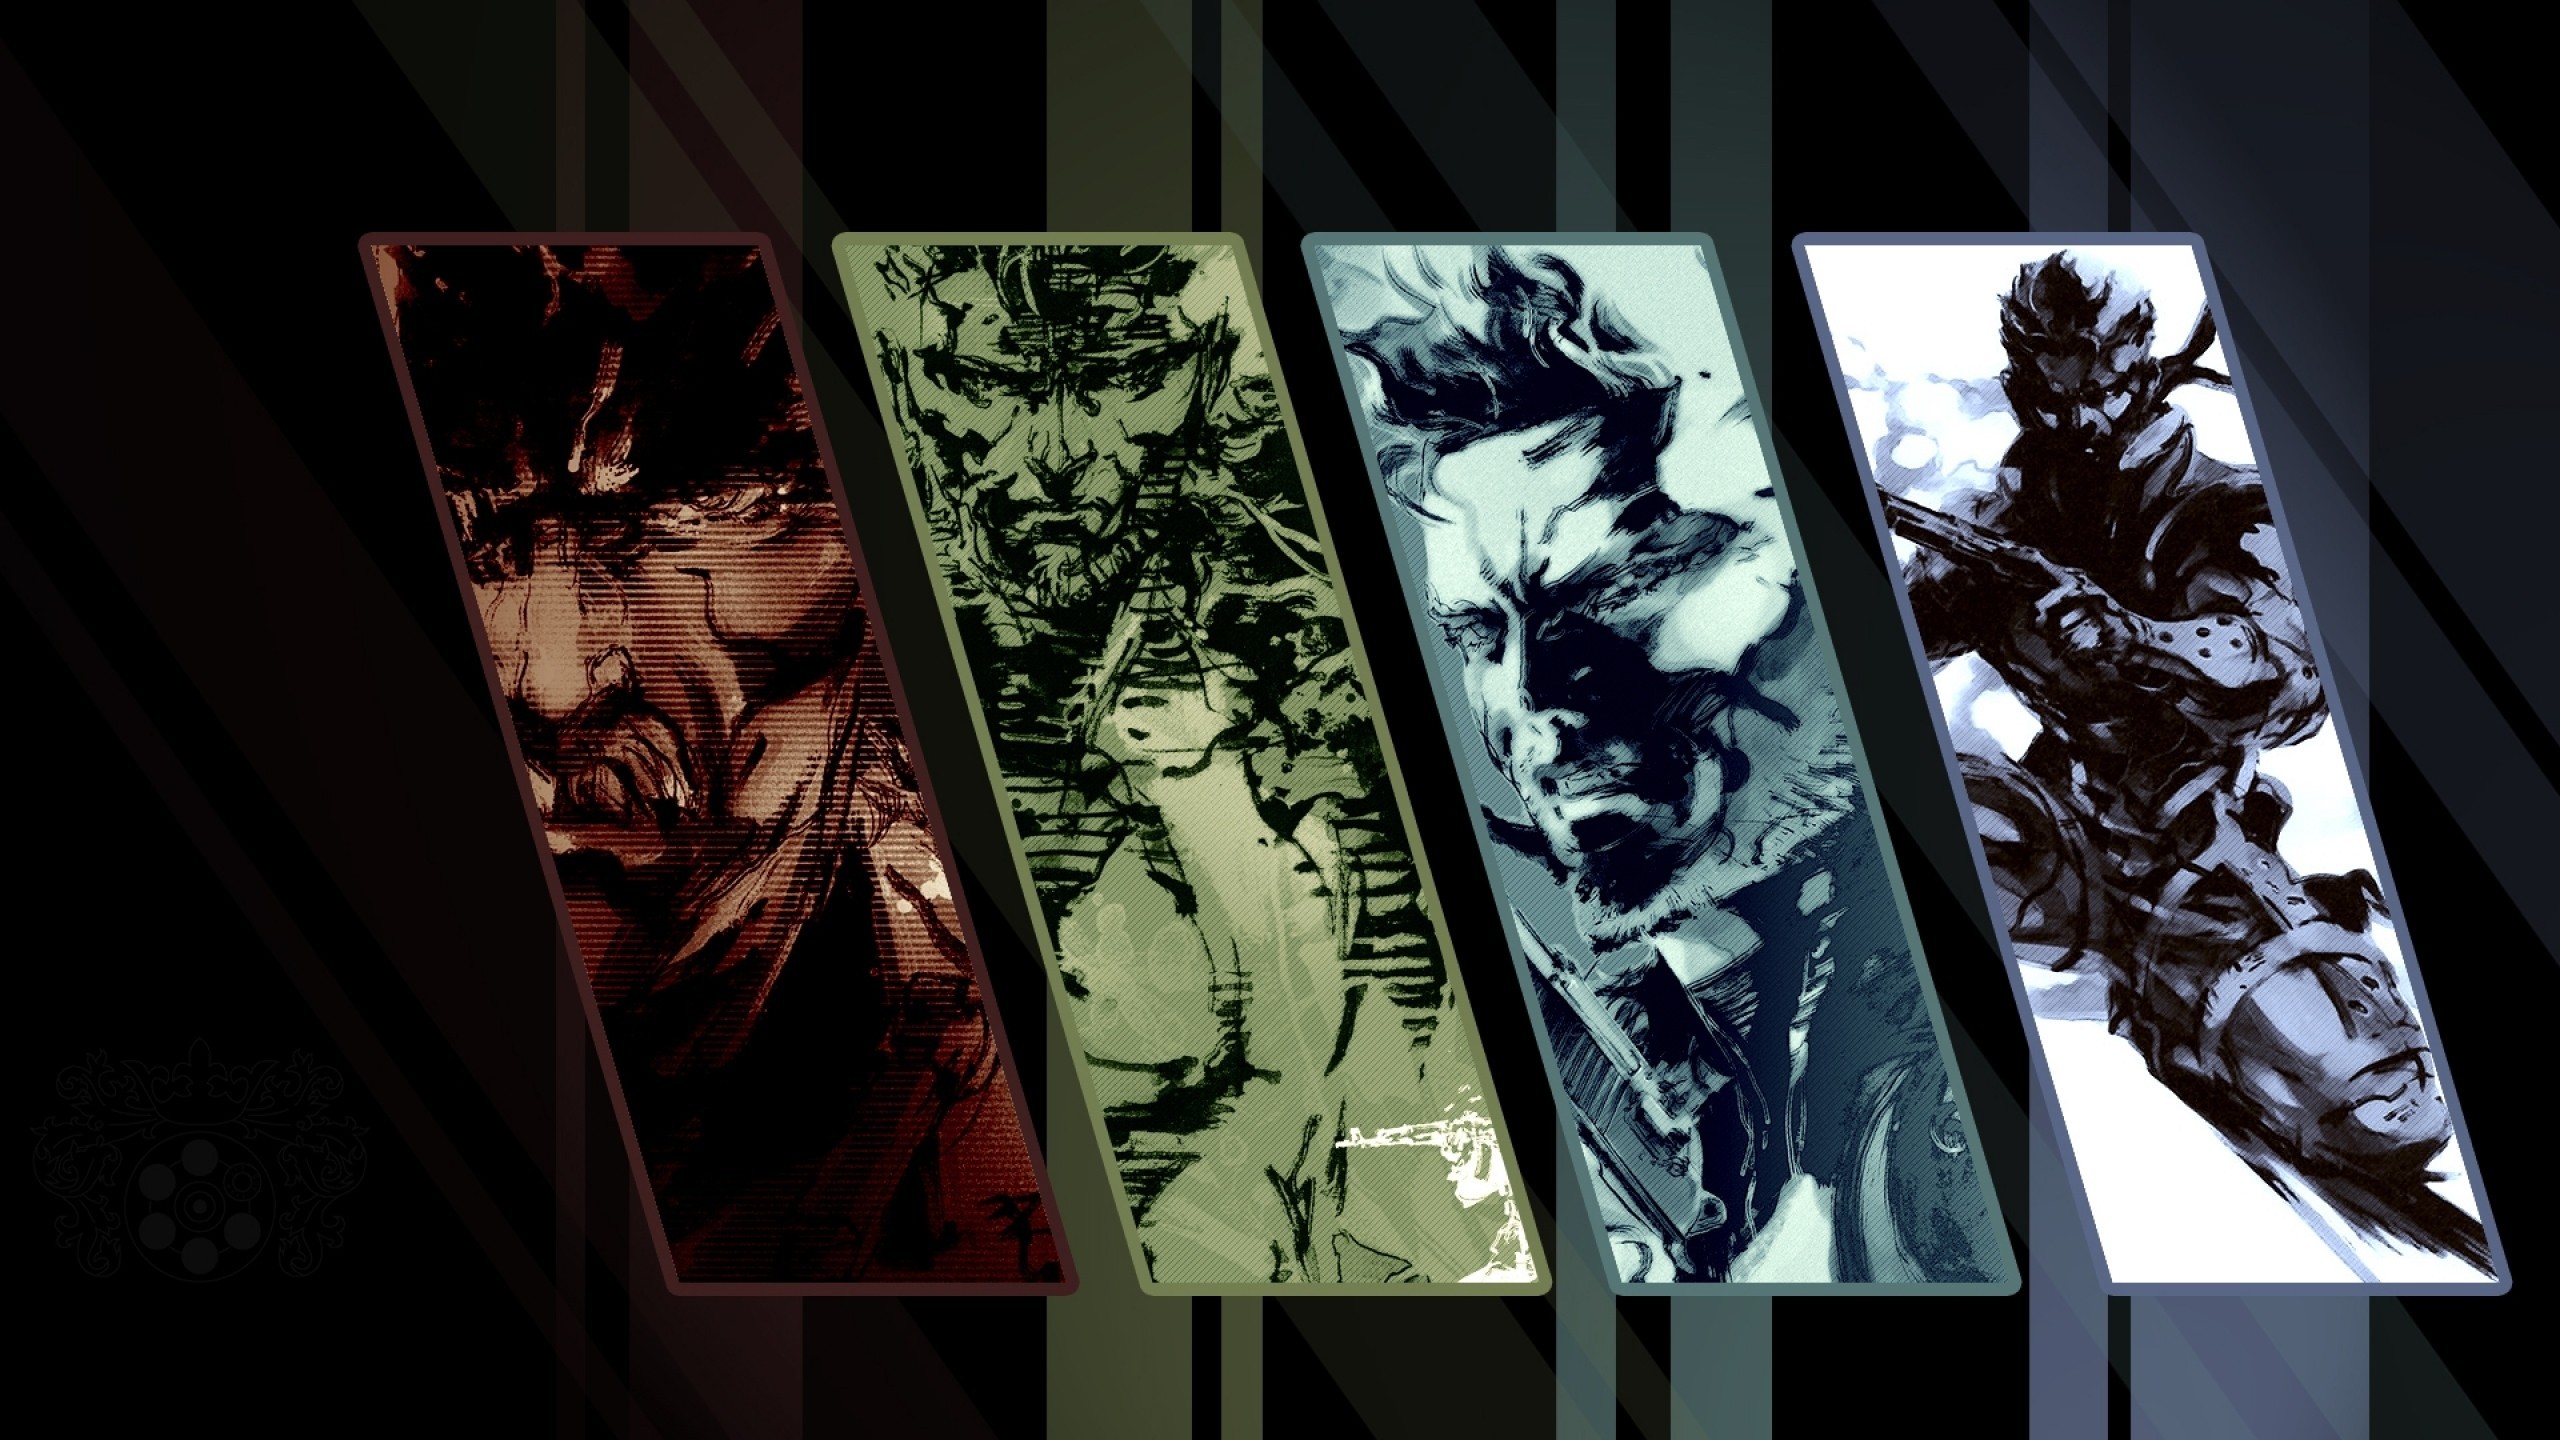 General 2560x1440 Metal Gear Solid collage video games Metal Gear Metal Gear Solid 4 Metal Gear Solid 2 video game art